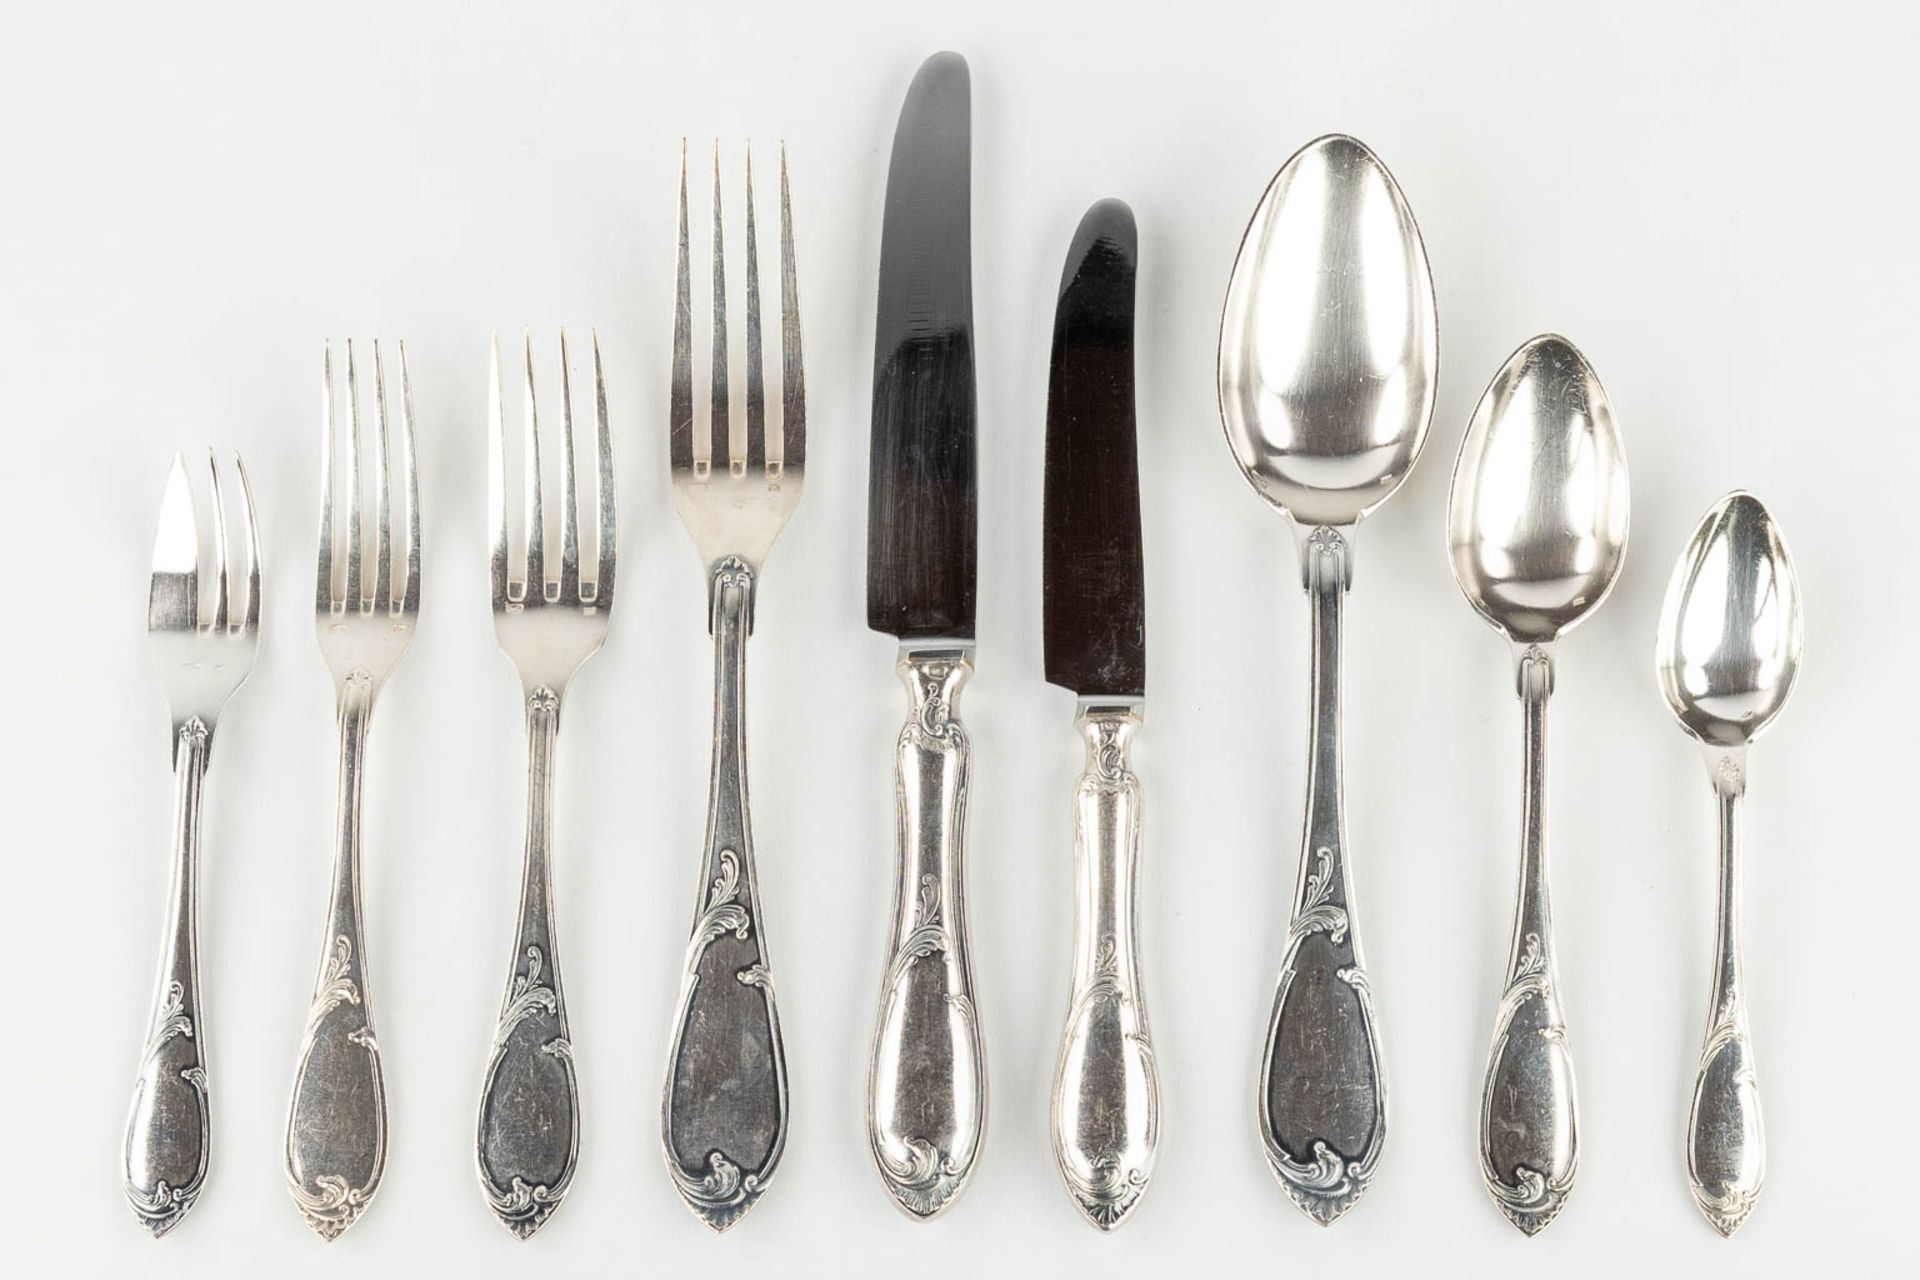 B. Wiskemann, Bruxelles, a silver-plated cutlery set, Louis XV style. (L: 30 x W: 39 x H: 22 cm) - Image 3 of 24